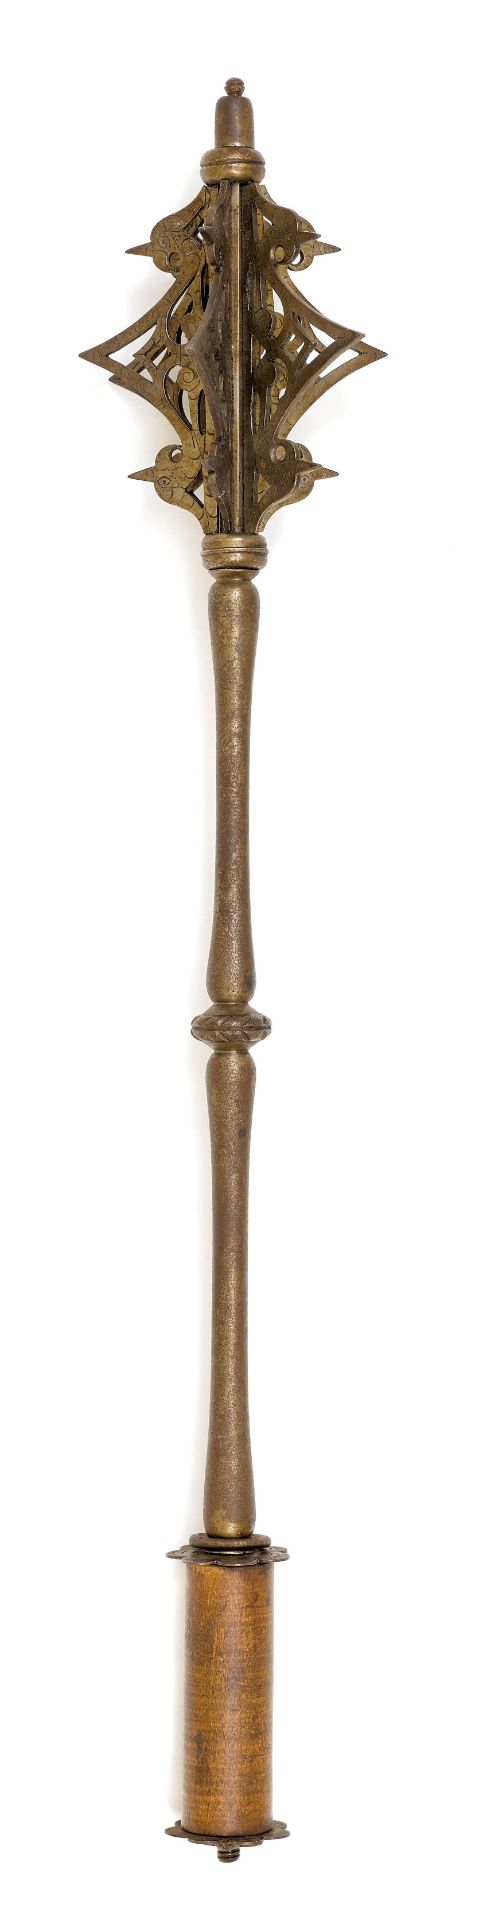 COURT SCEPTER DESIGNED AS A MACE